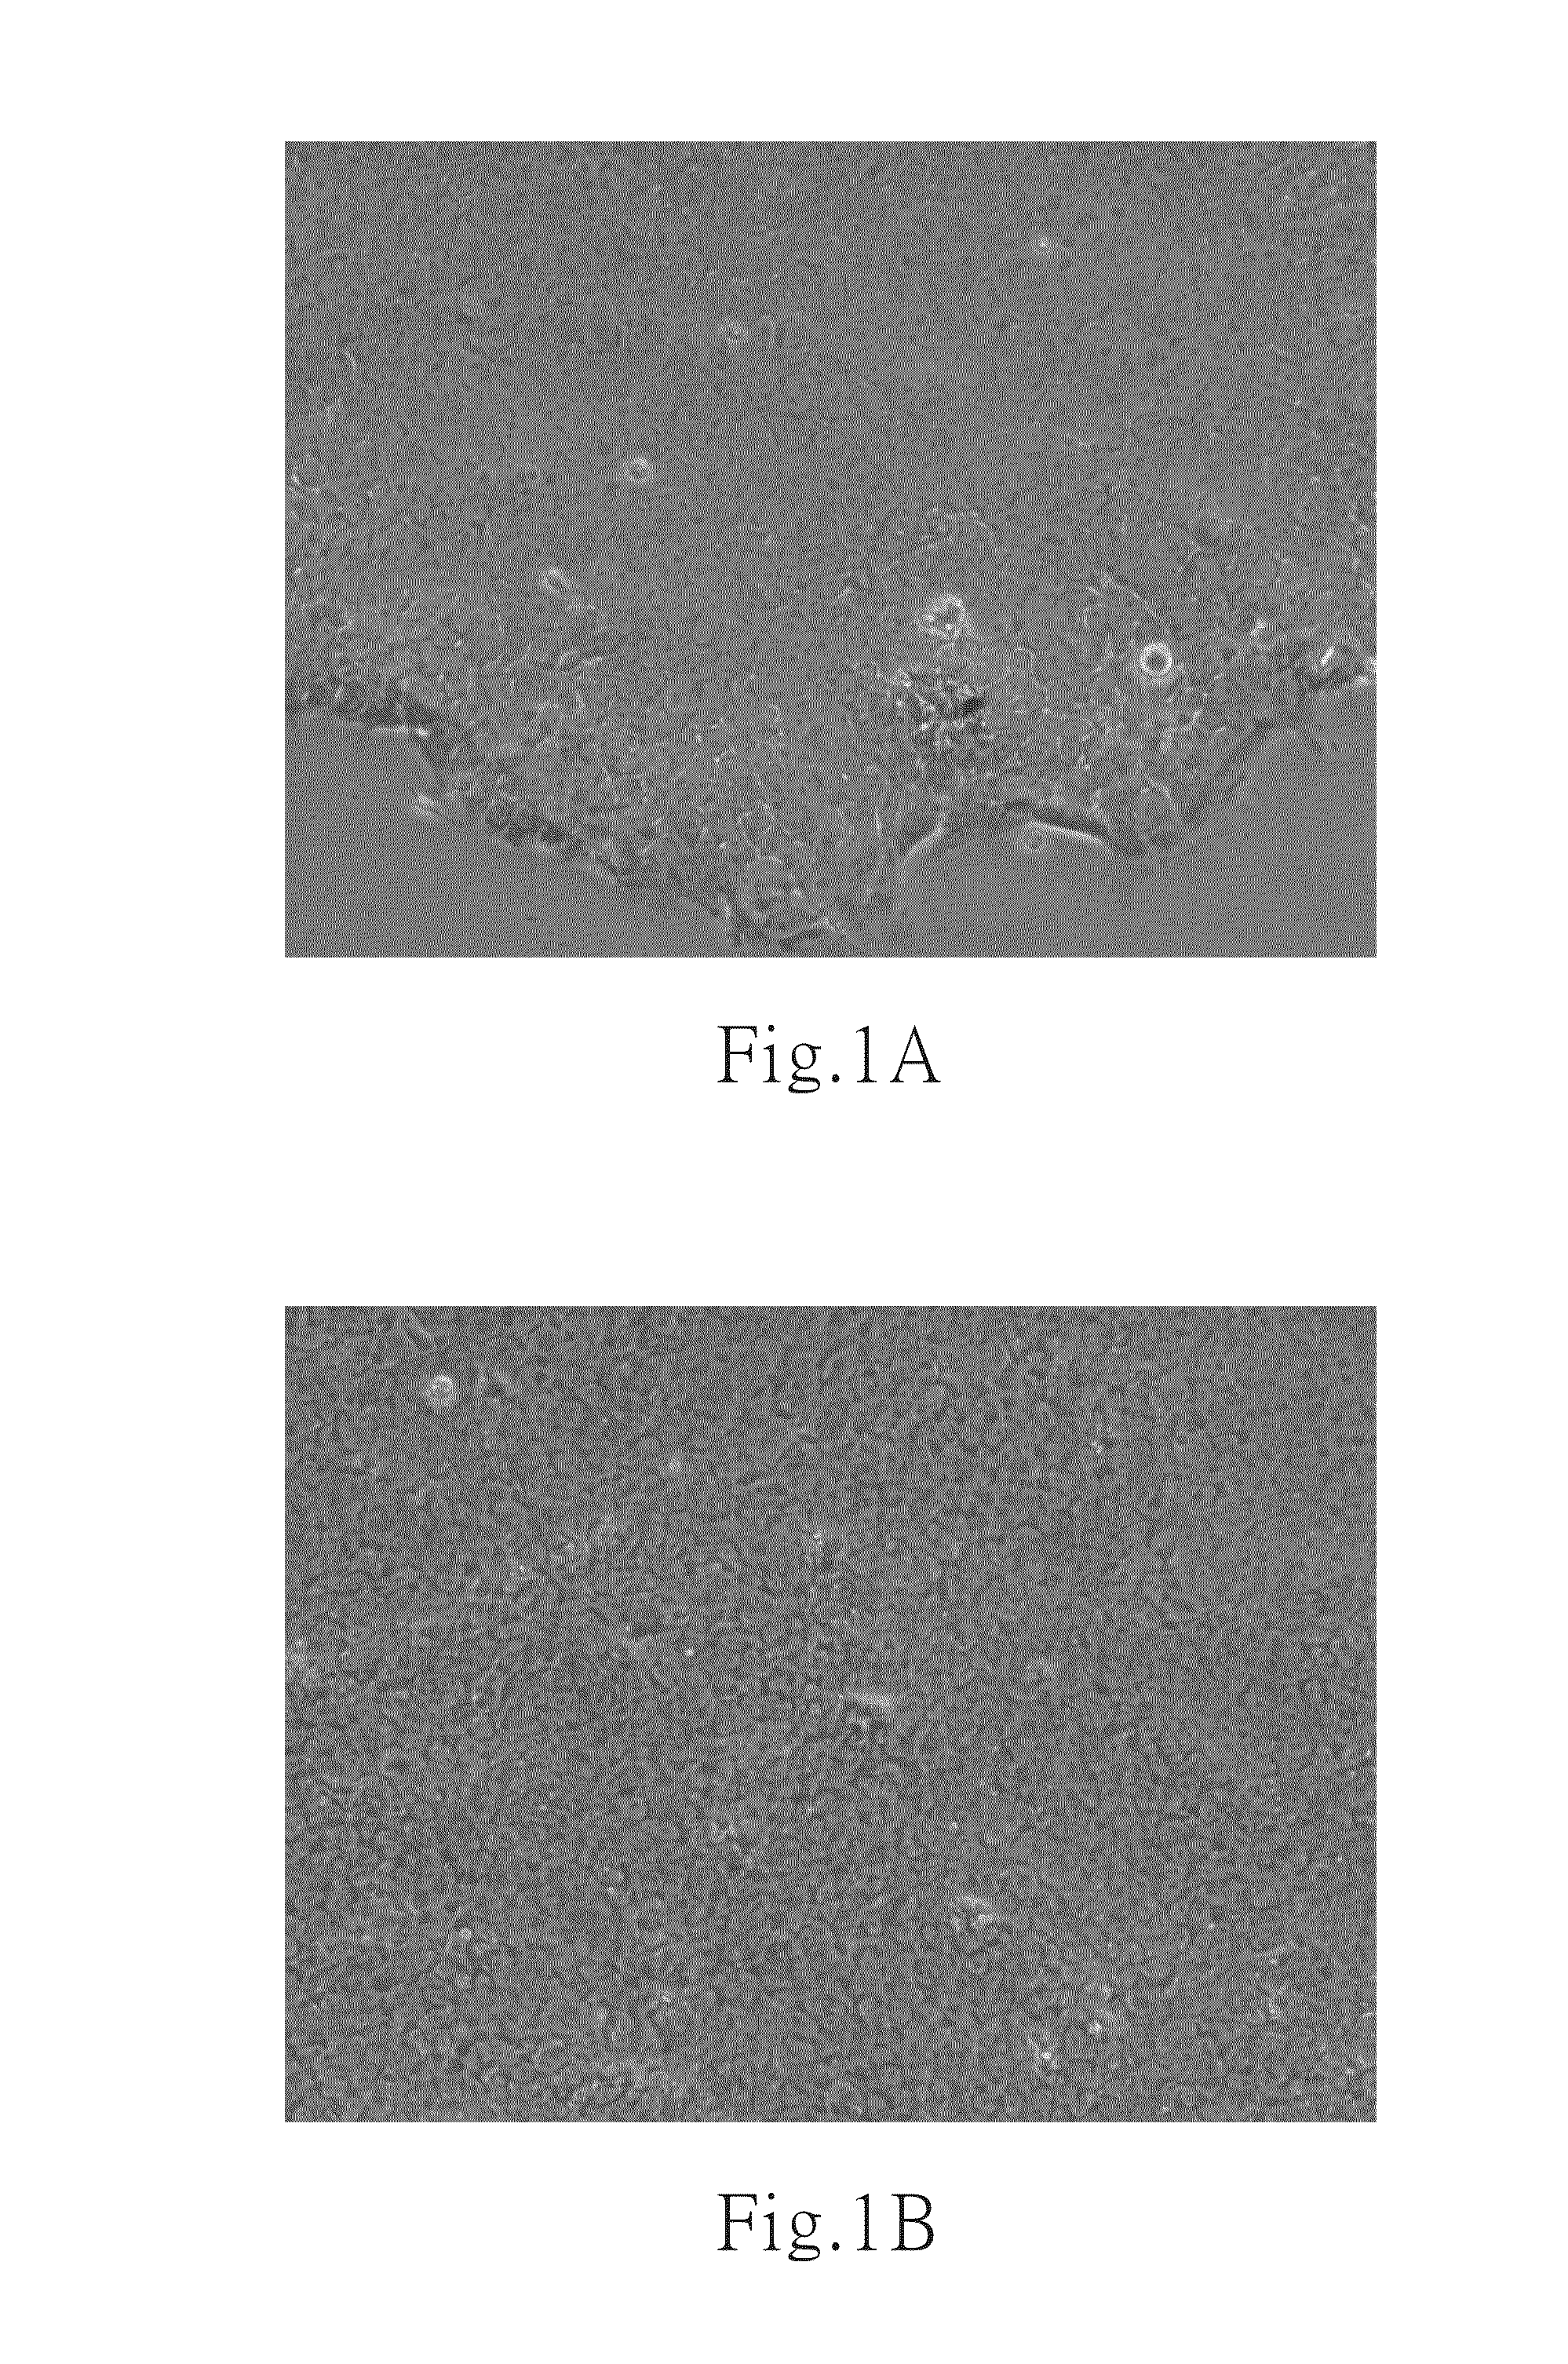 Culture medium and method for inducing differentiation of pluripotent stem cells into neuroepithelial cells